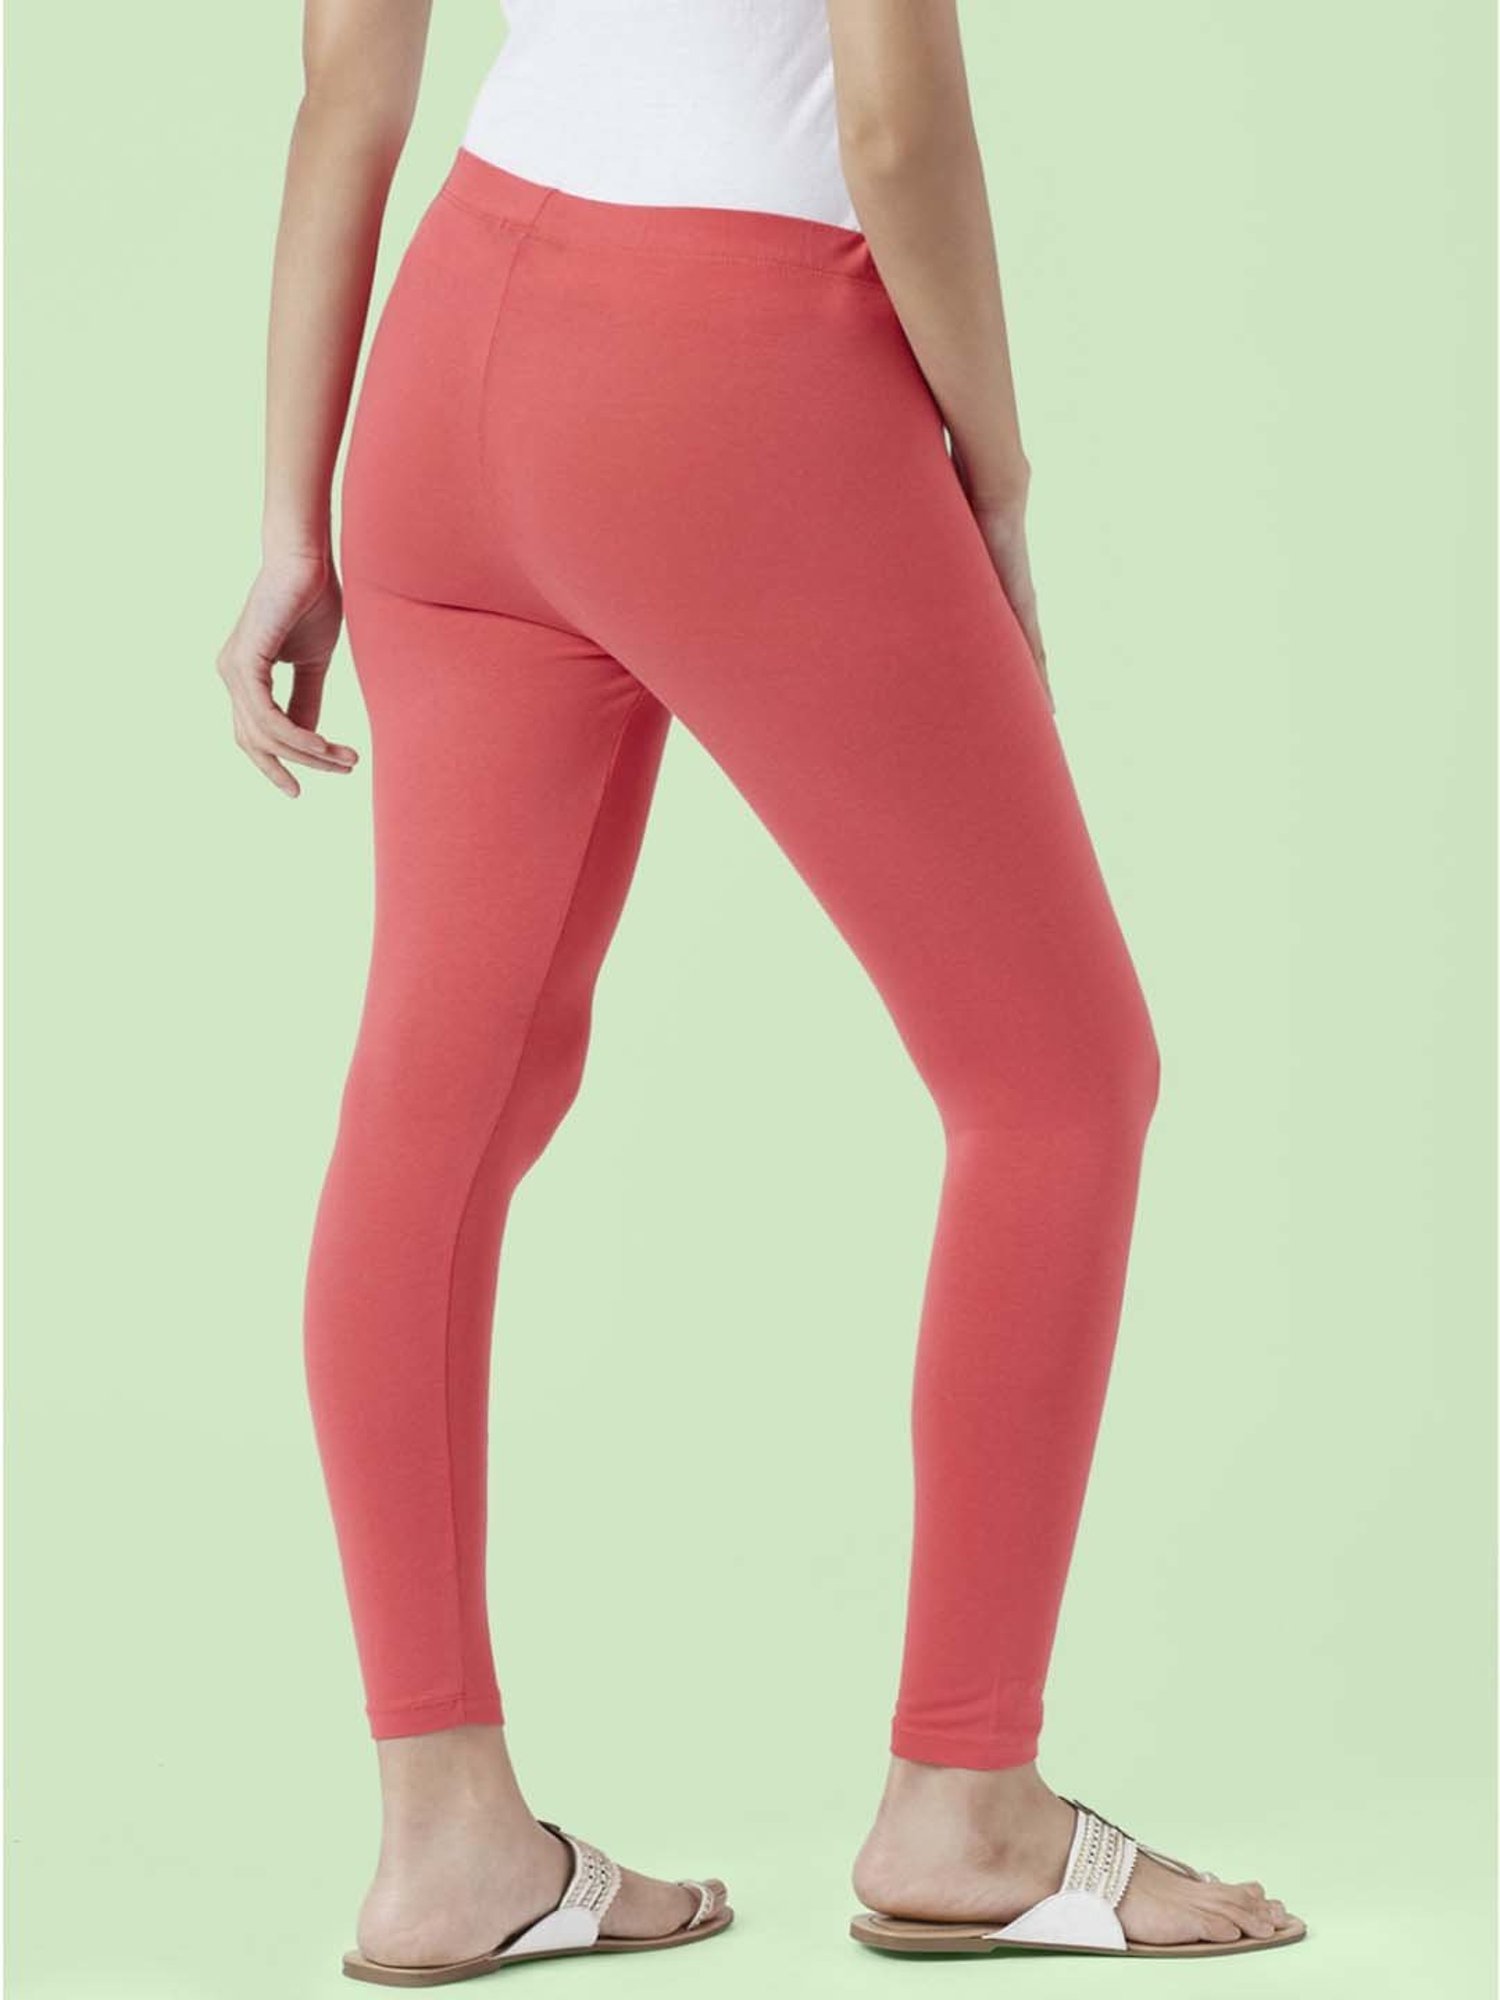 Buy Pink Leggings for Women by AVAASA MIX N' MATCH Online | Ajio.com